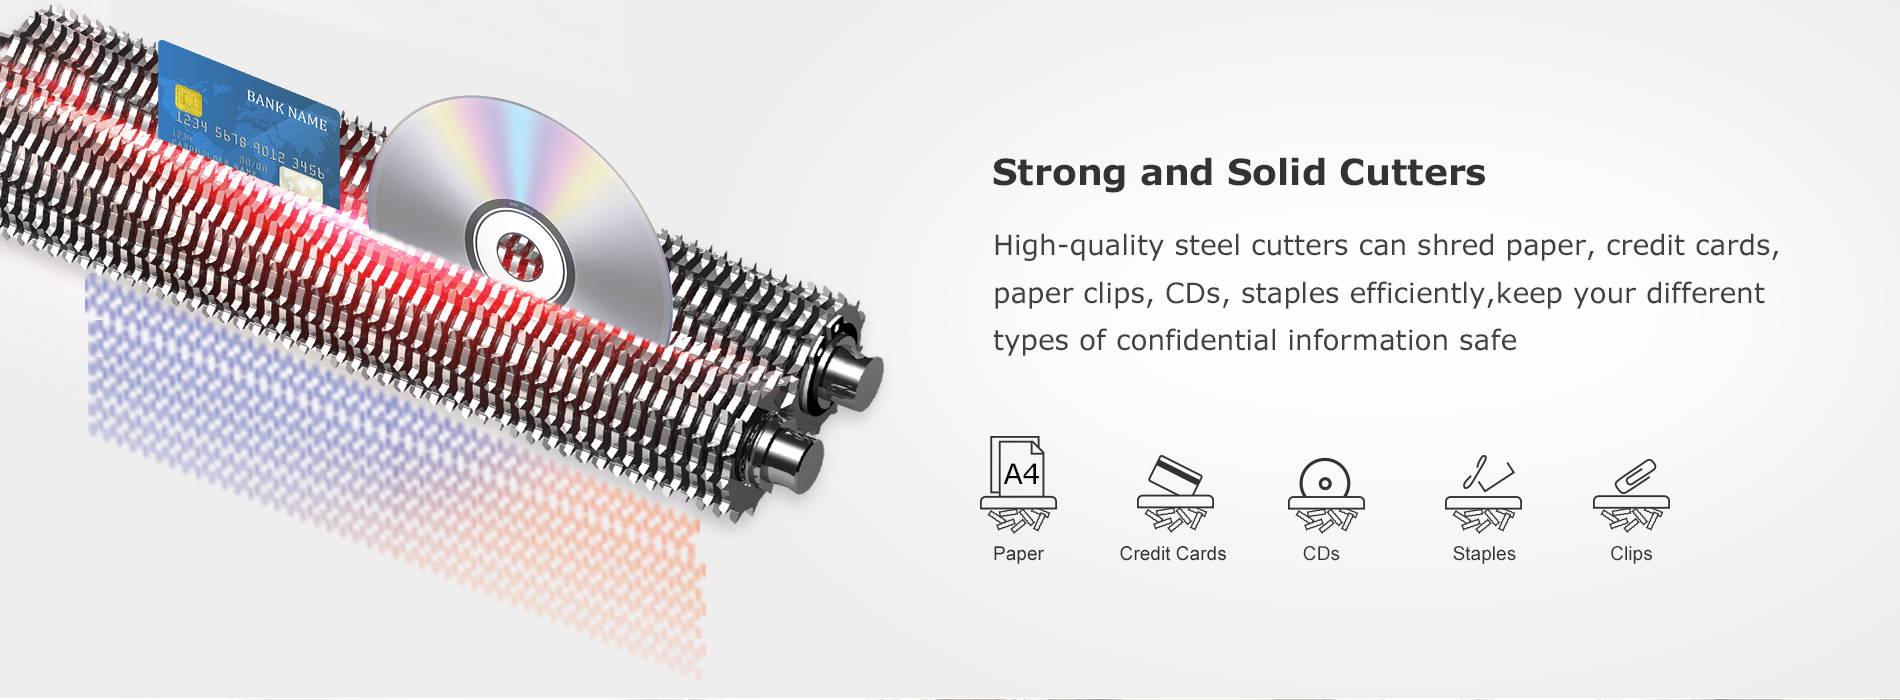 Strong and Solid Cutters High-quality steel cutters can shred paper, credit cards, paper clips, CDs, staples efficiently,keep your different types of confidential information safe